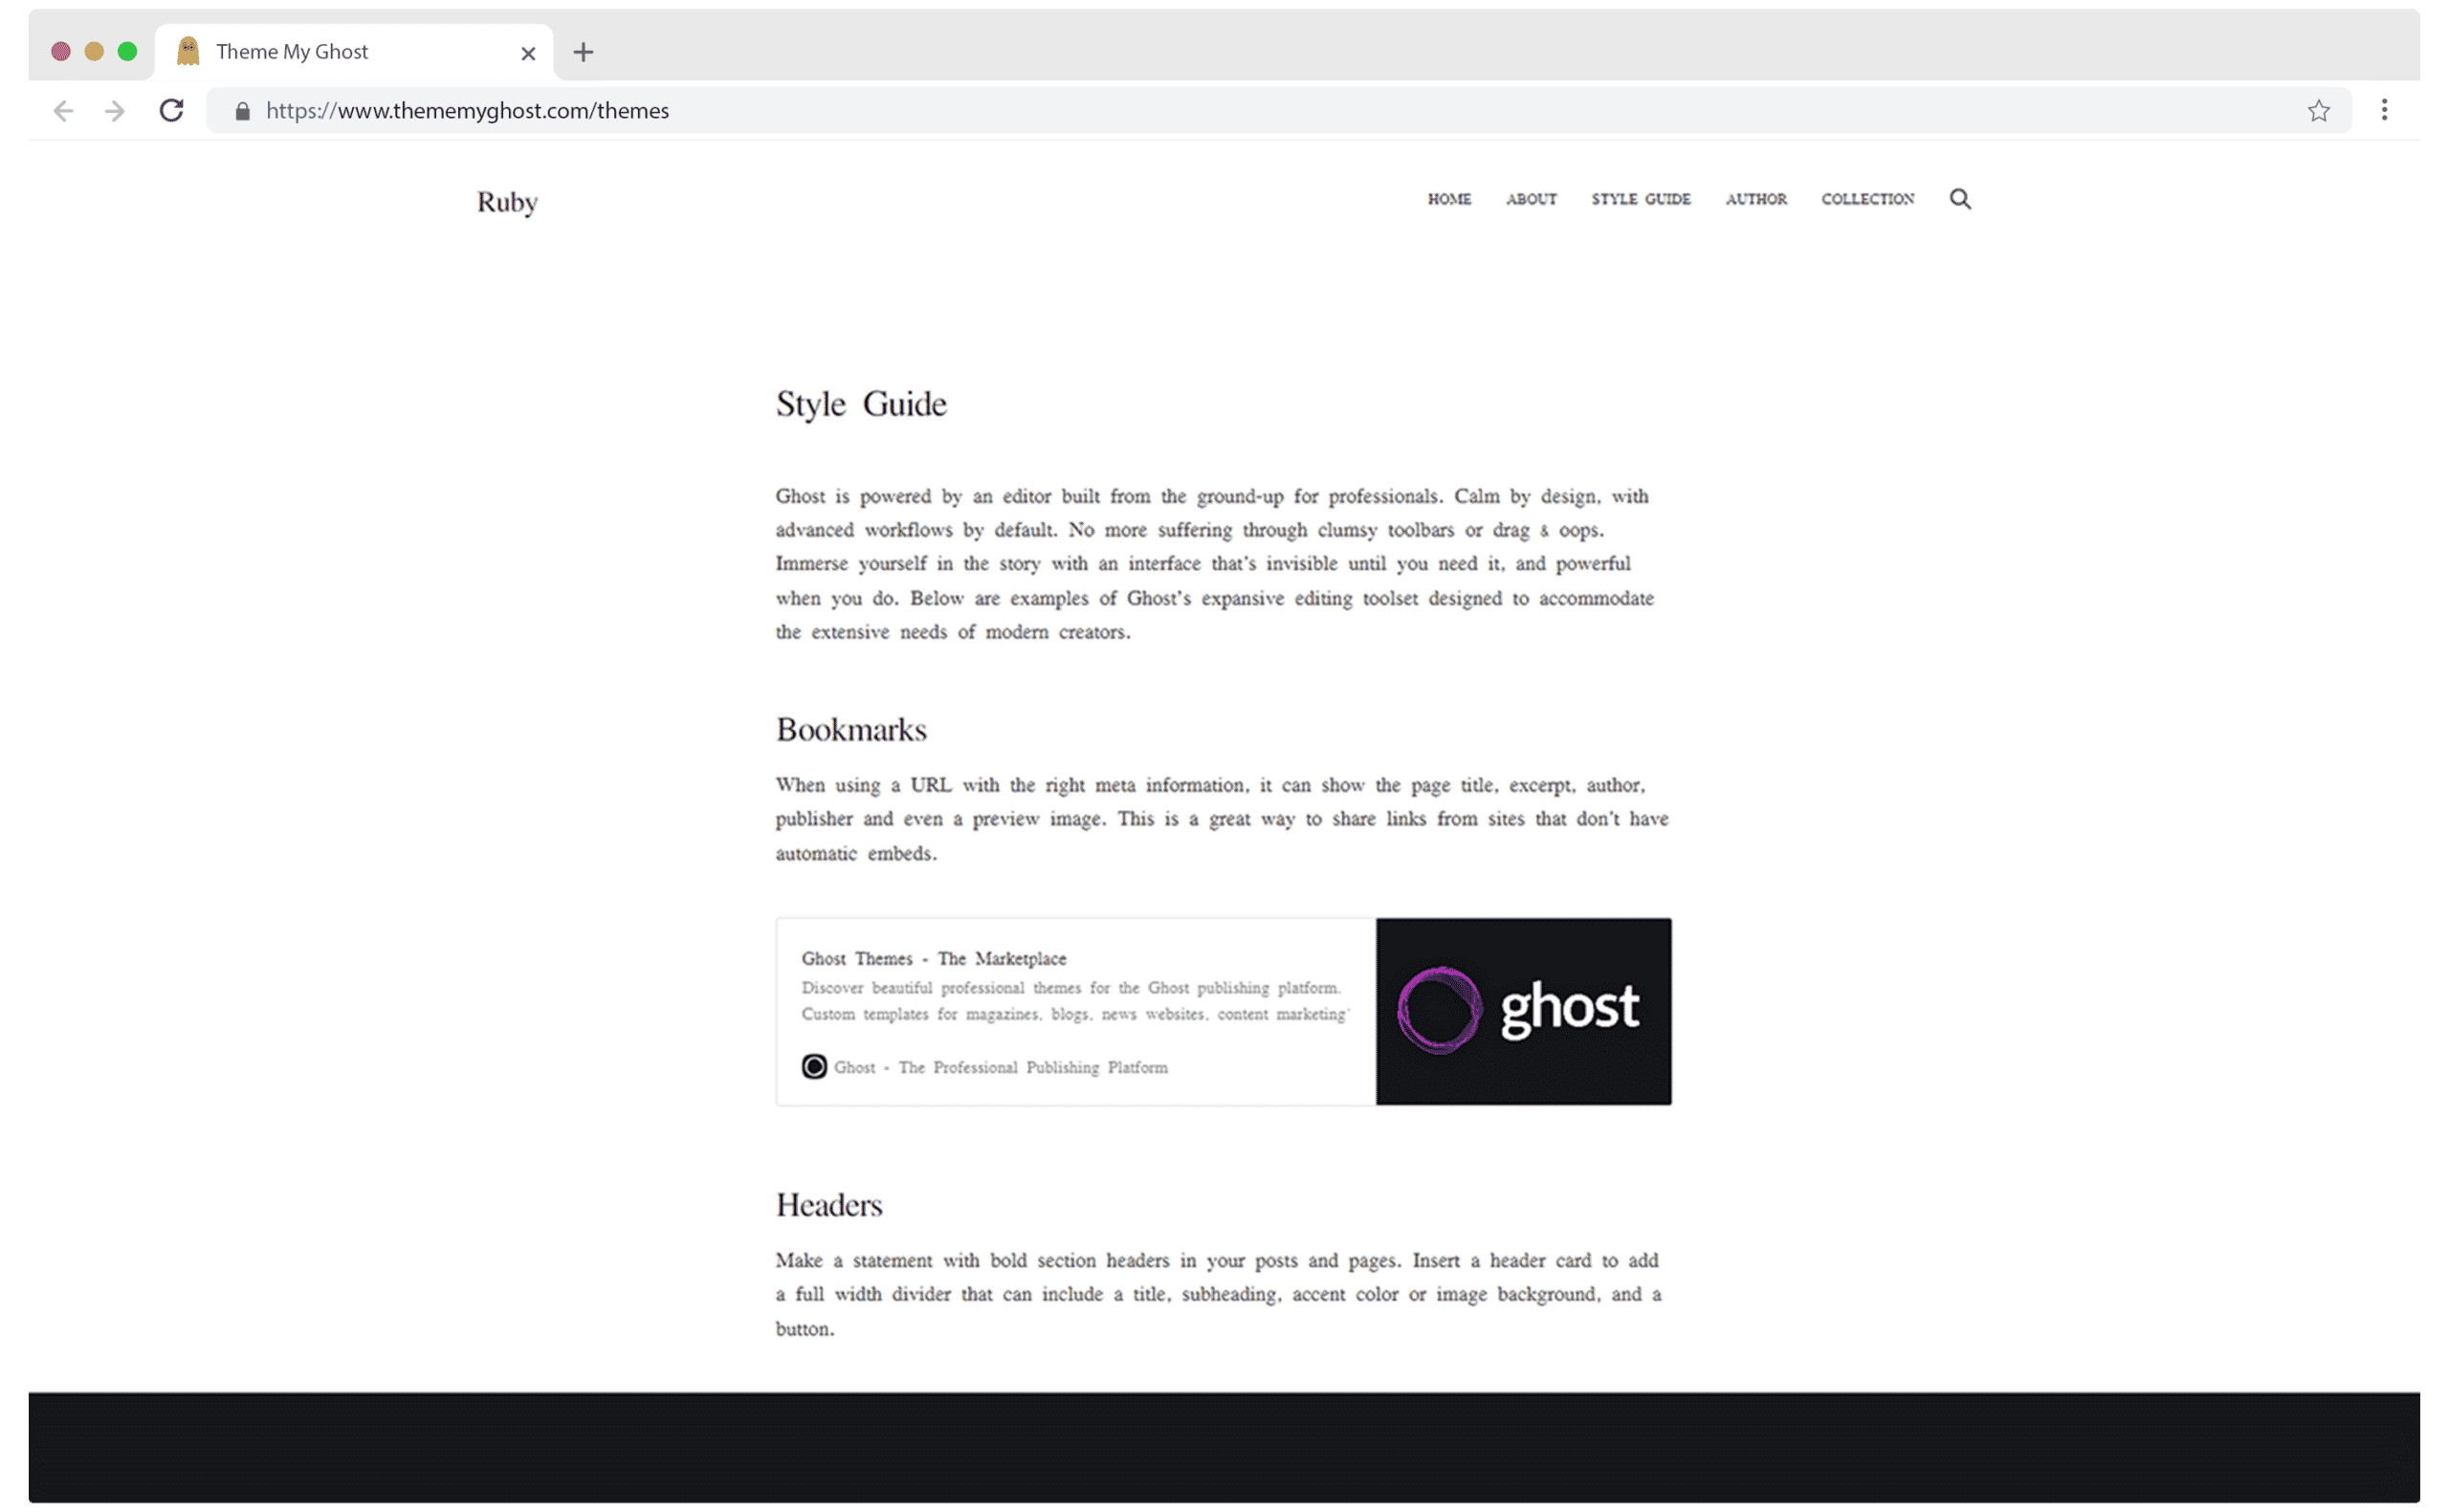 Ruby Official Free Ghost Theme Template for Technology Gadgets and General Purpose by Ghost 10